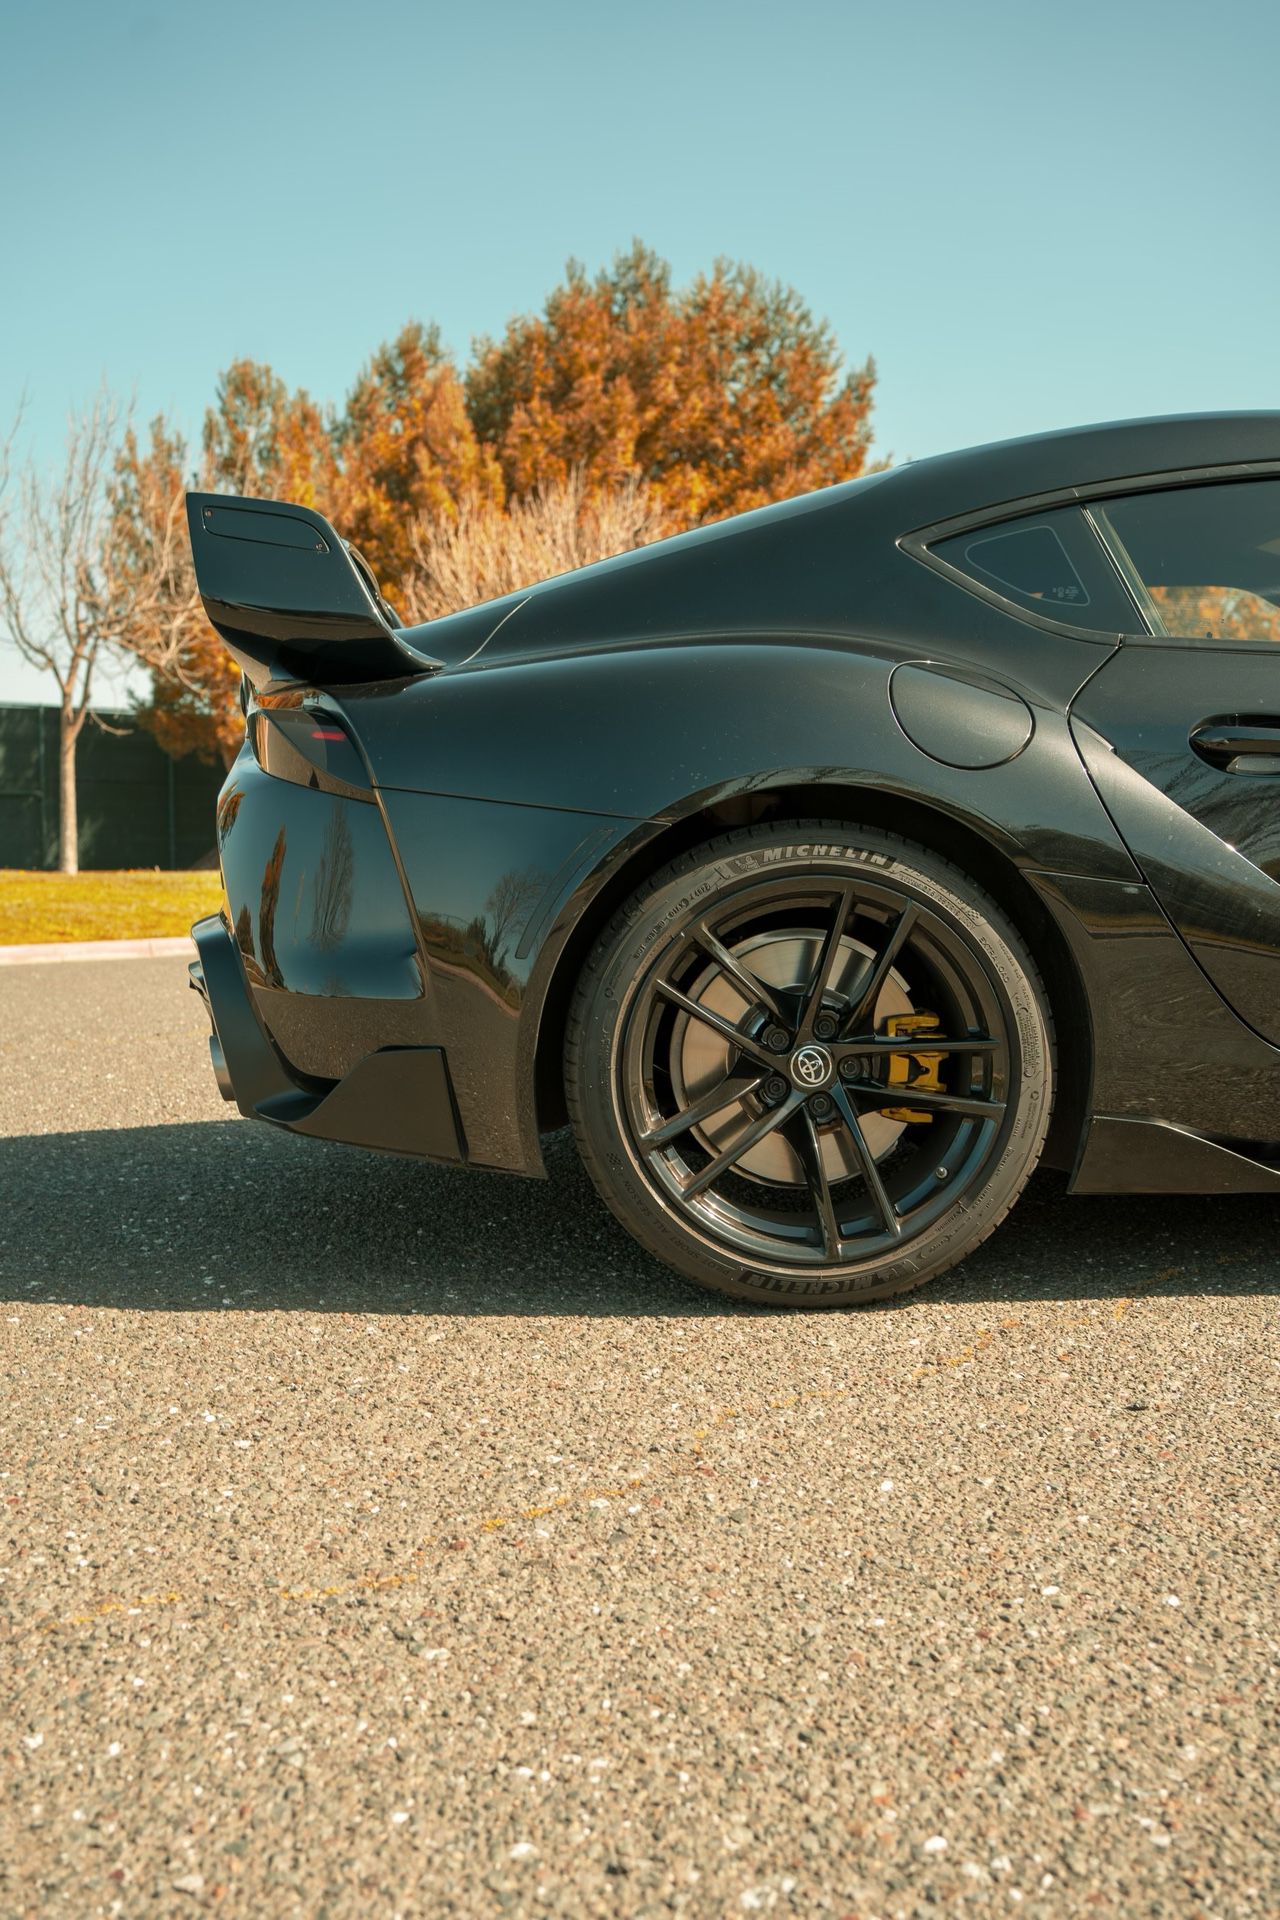 A90 Supra Stock Tires Powder Coated Black Michelin Tires